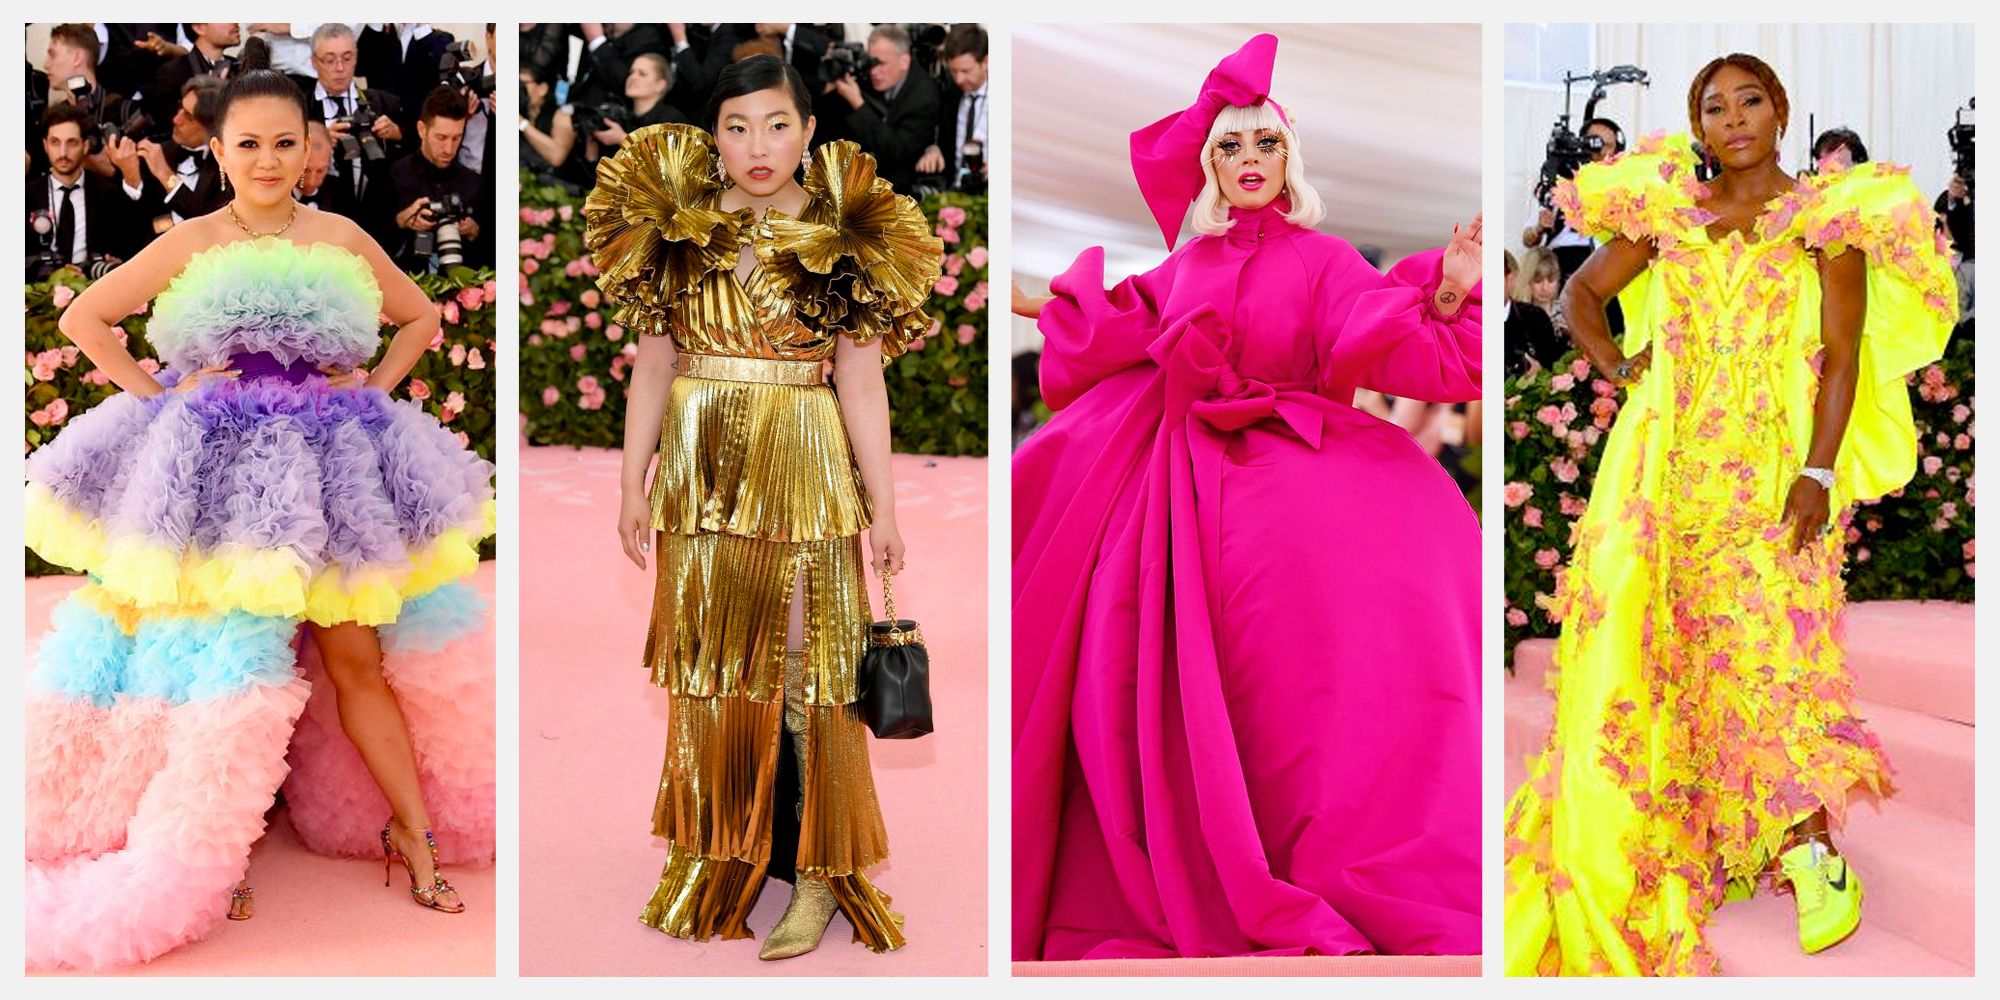 Met Gala 2019 - The Met Gala Red Carpet Dresses And Gowns That Made The  Best Dressed List